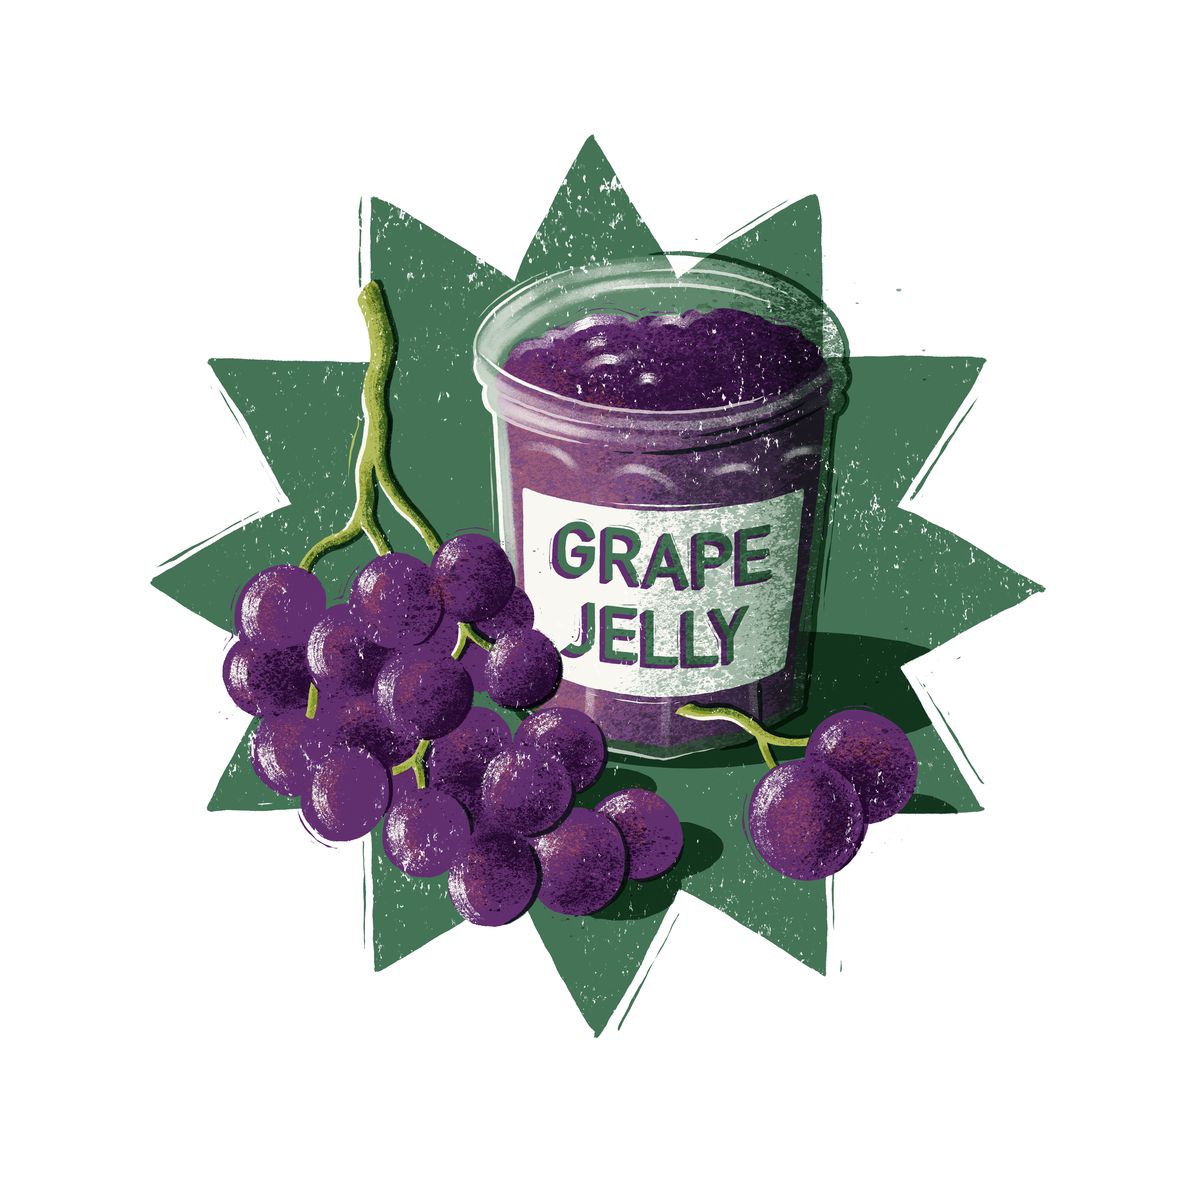 An illustration of grape jelly next to a bunch of grapes.